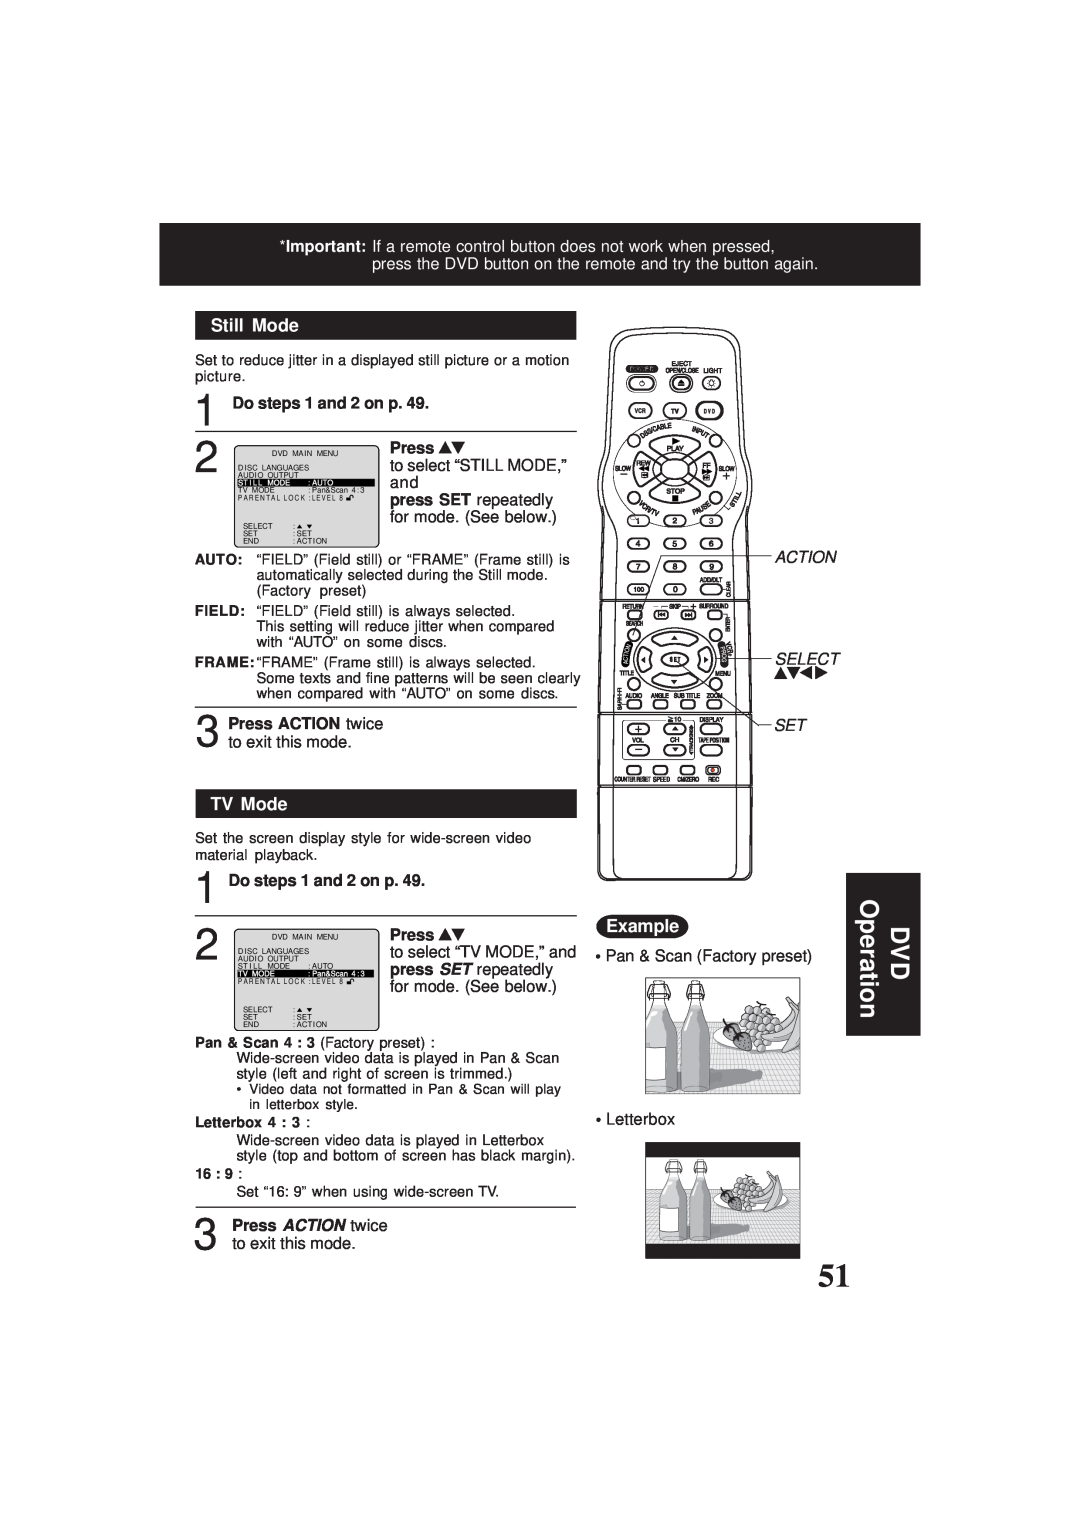 Panasonic PV-D4761 Still Mode, TV Mode, Example, Do steps 1 and 2 on p, Press, press SET repeatedly, for mode. See below 